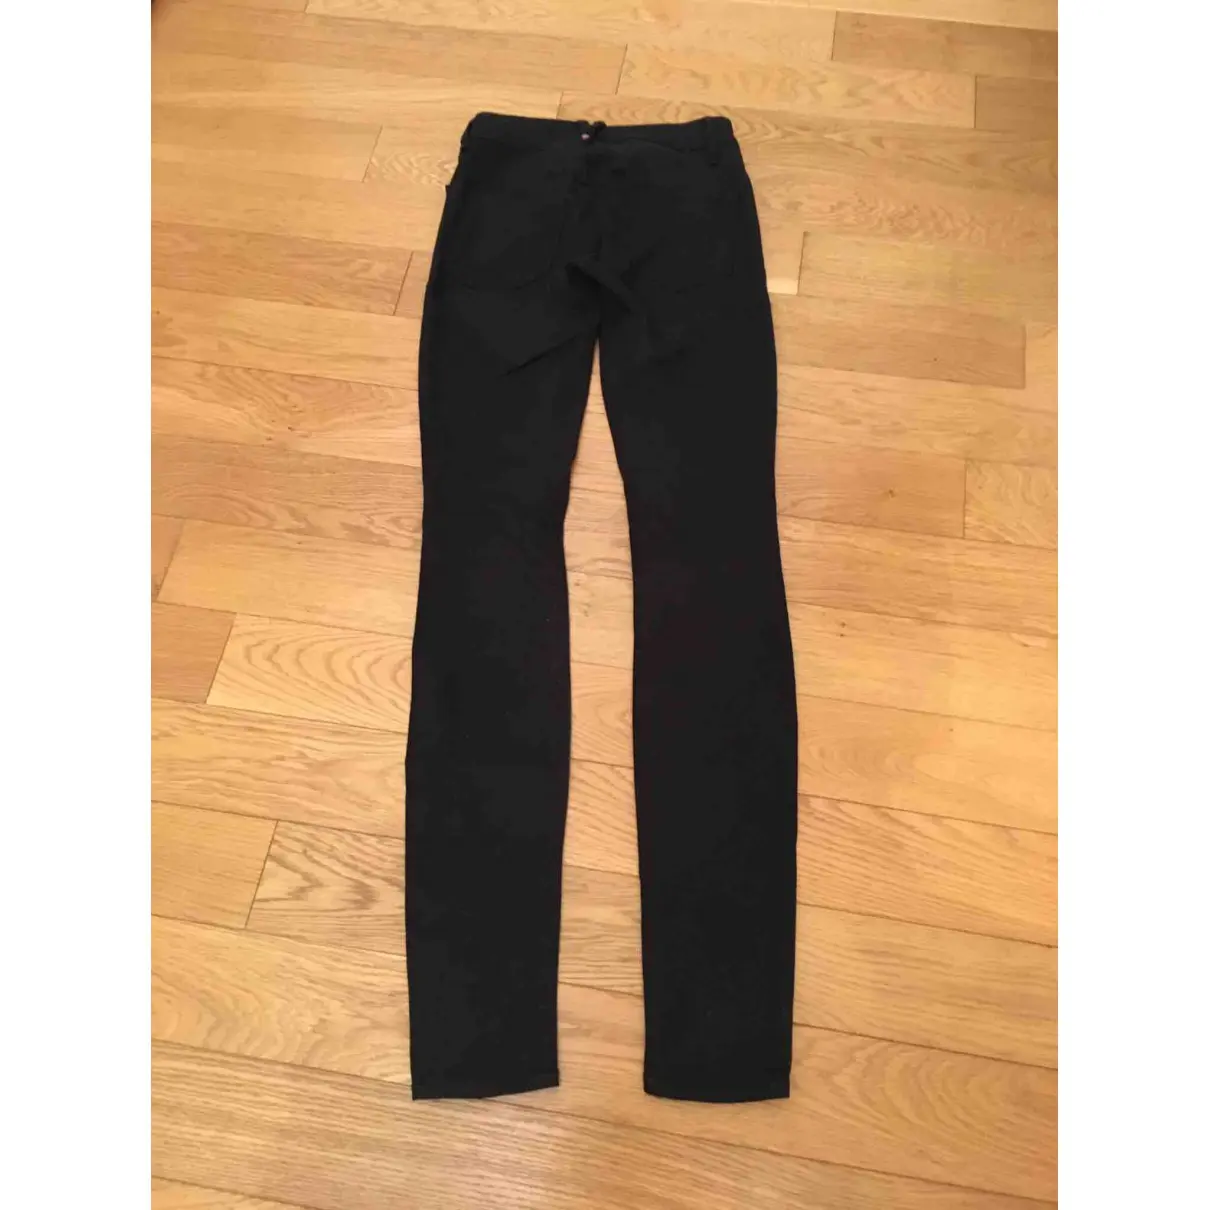 Marc by Marc Jacobs Slim pants for sale